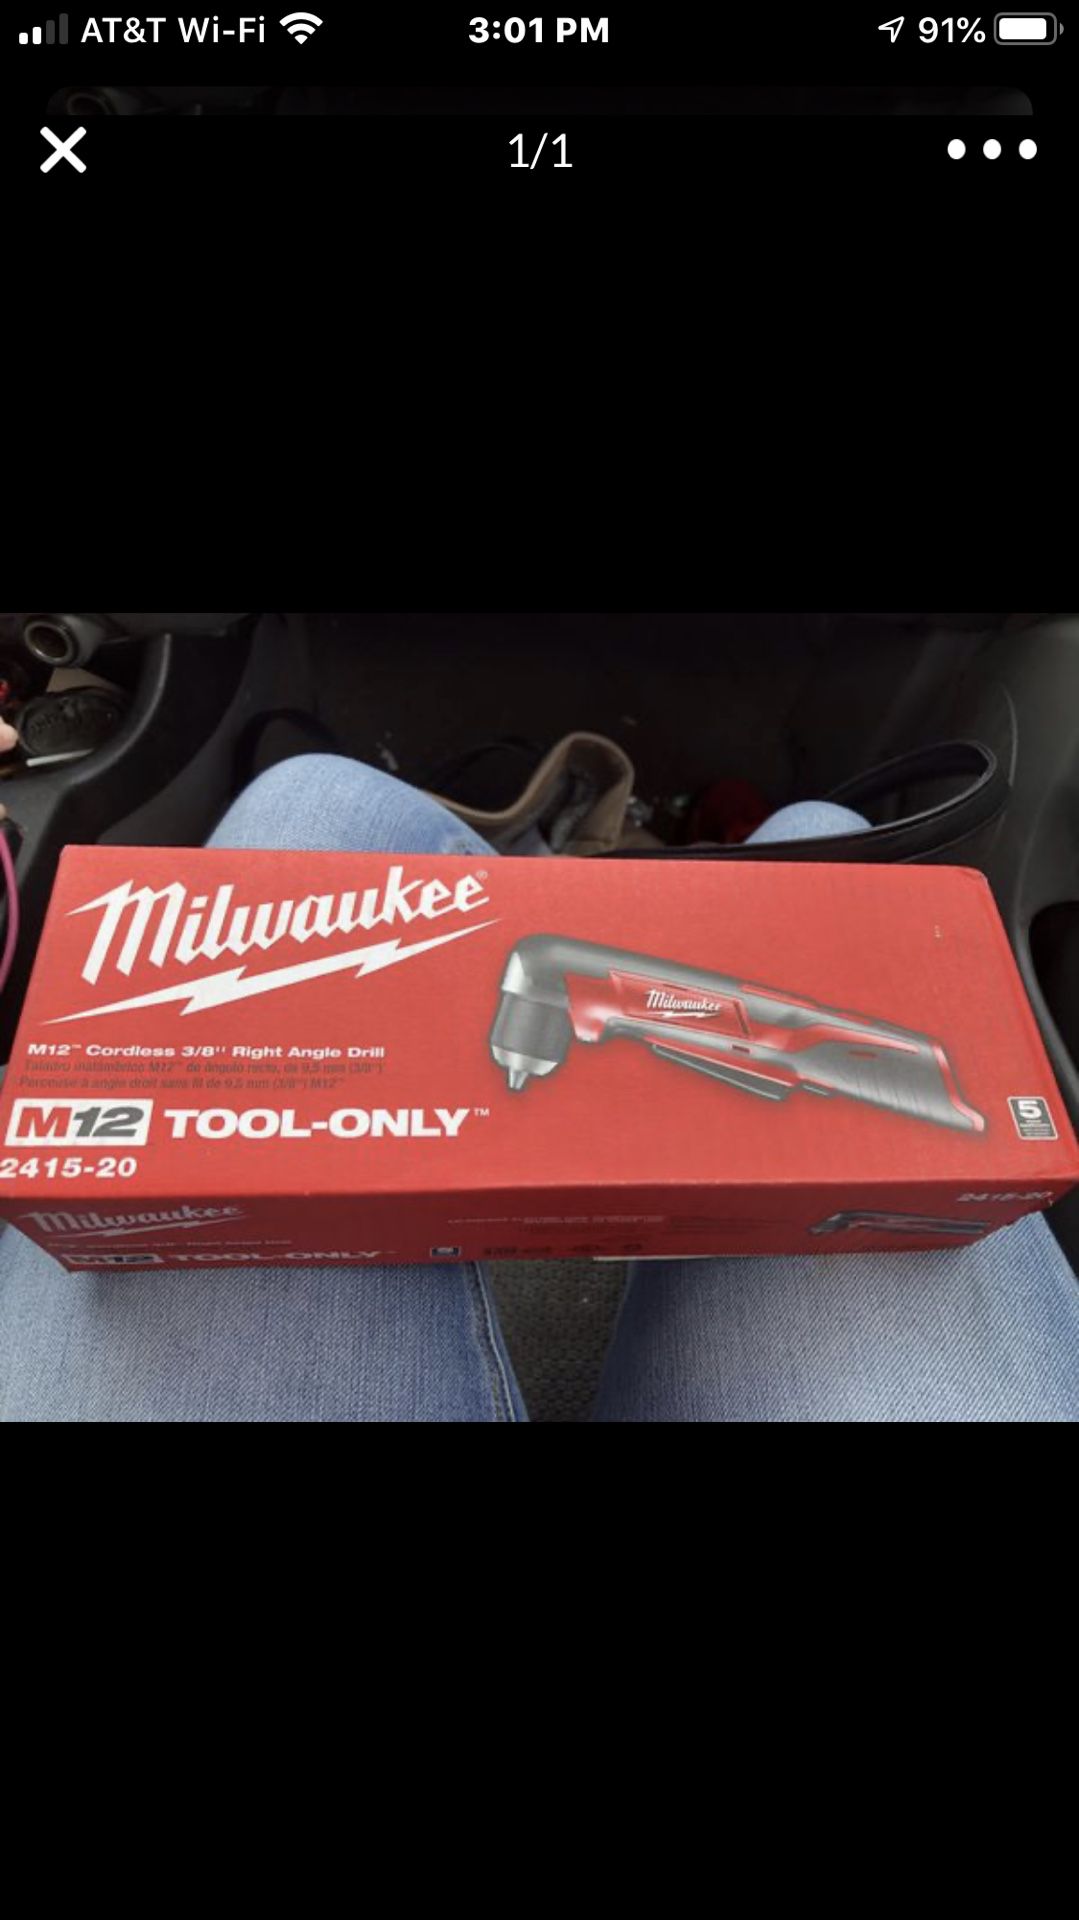 Milwaukee M12 3/8” Right Angle Drill - Tool Only